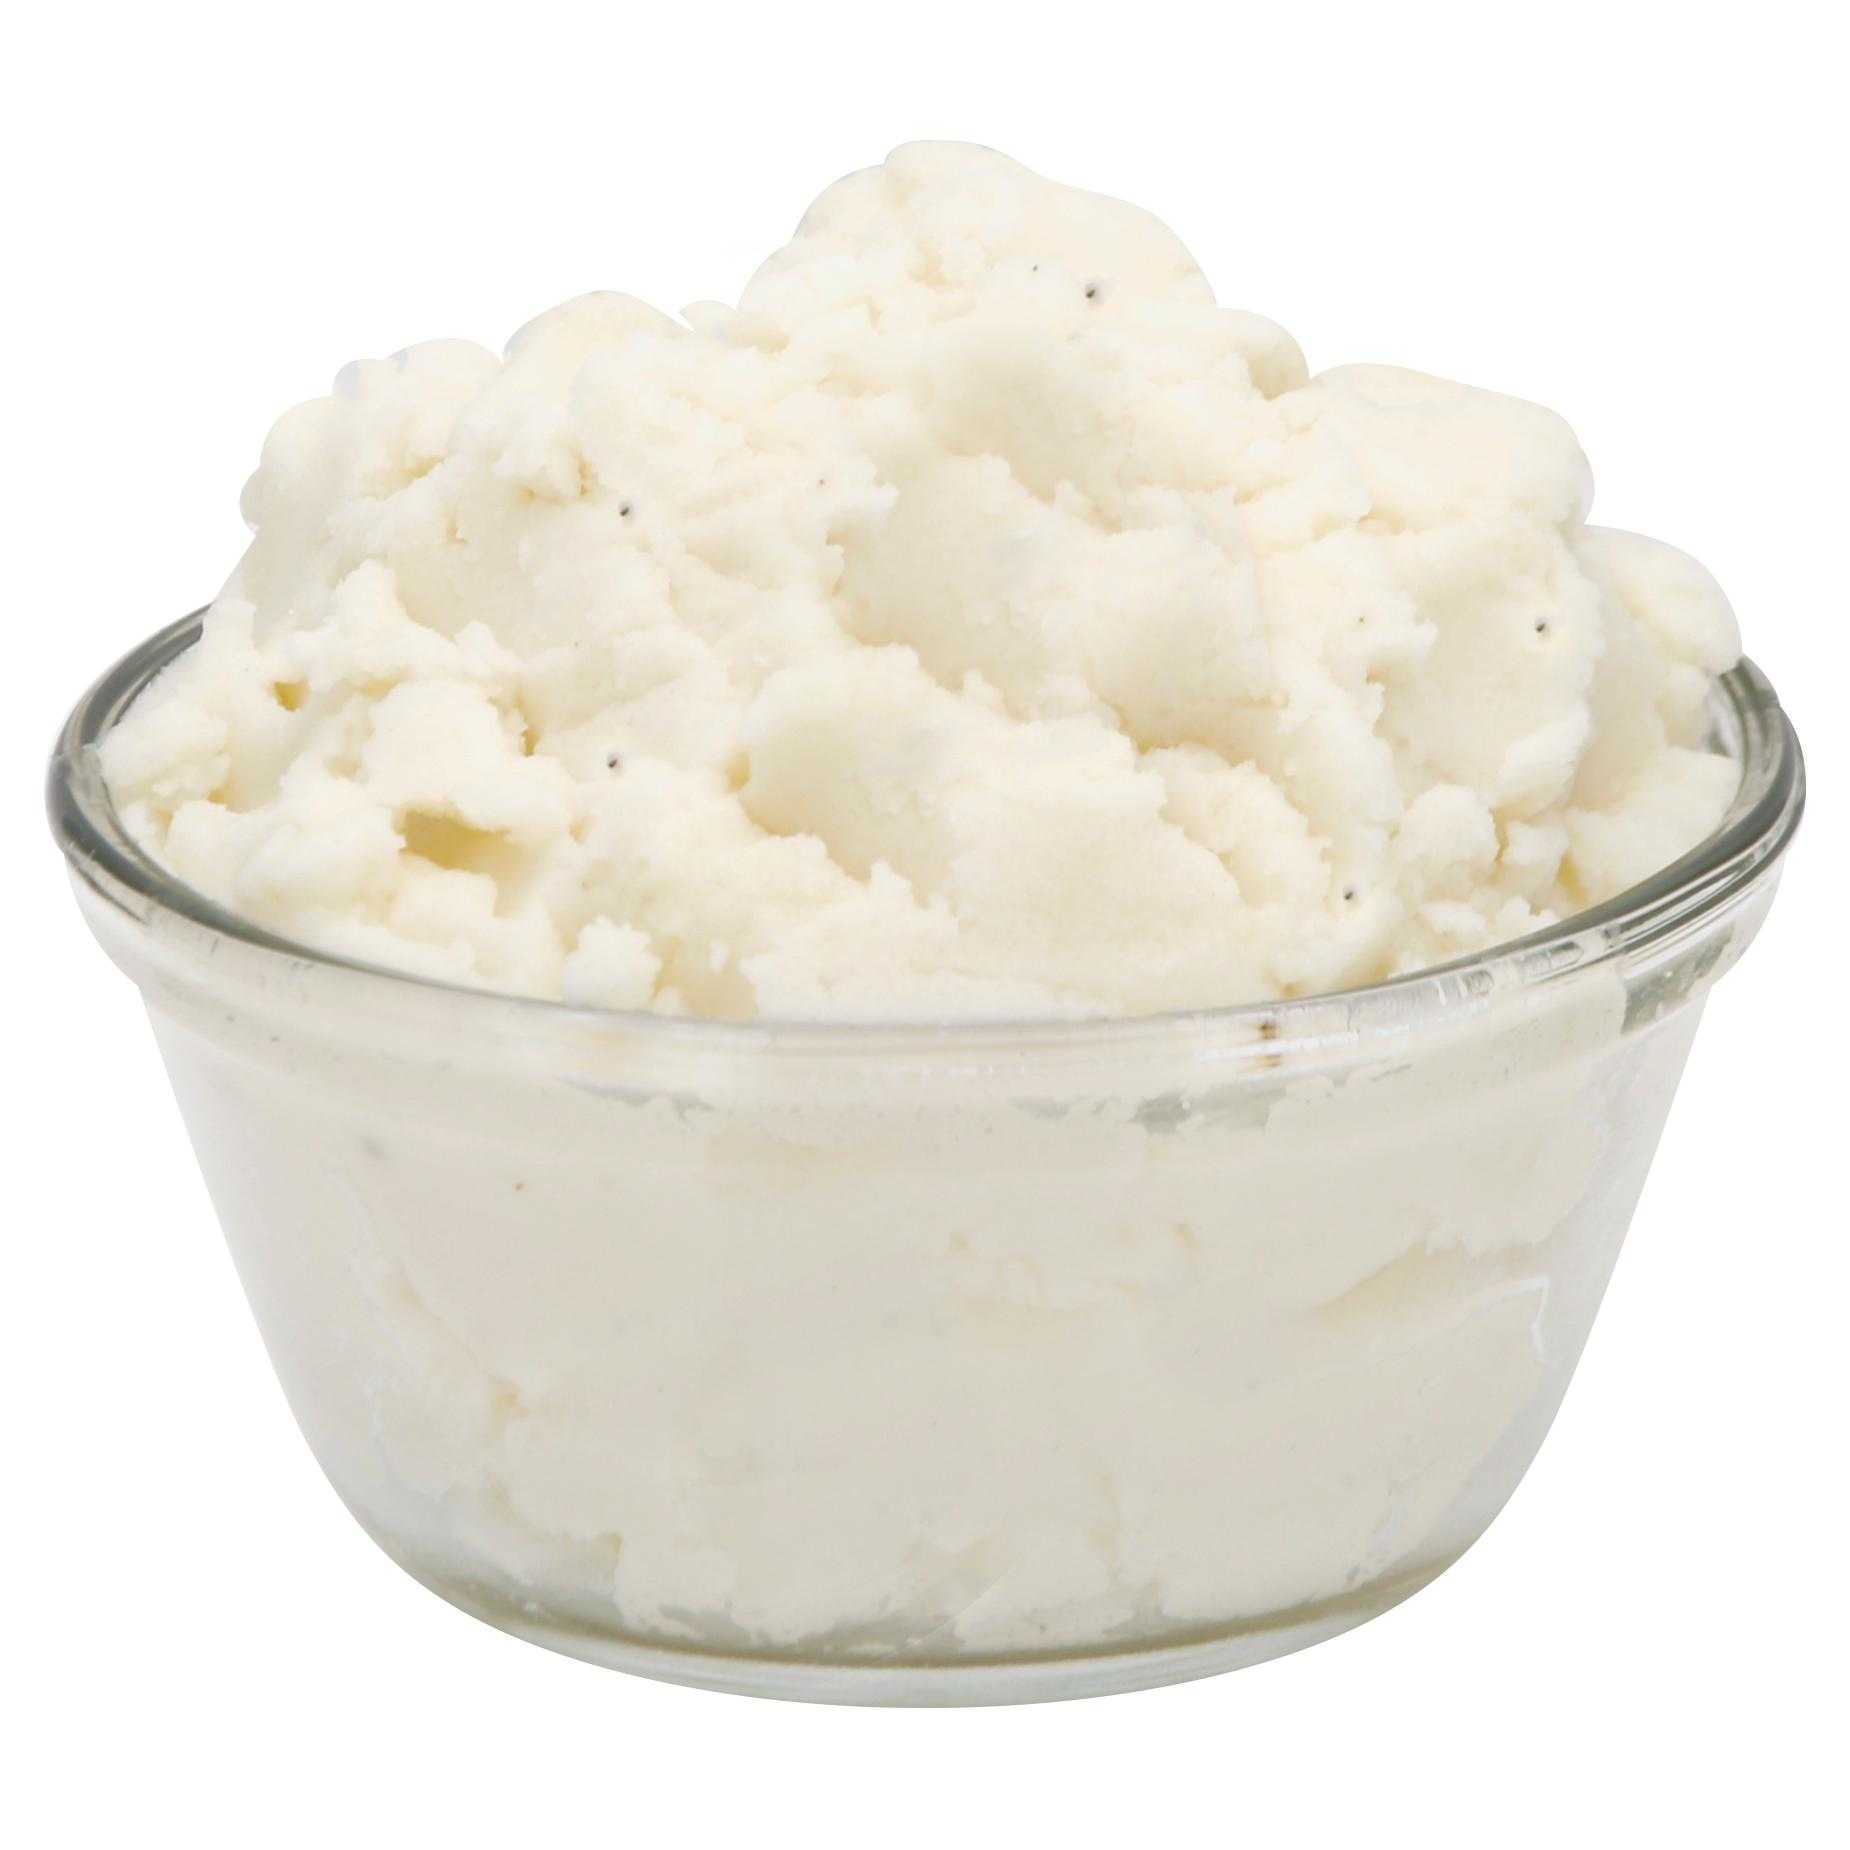 Simply Potatoes® Refrigerated Deluxe Mashed Potatoes made with peeled russet potatoes, 4/6 Lb Bags